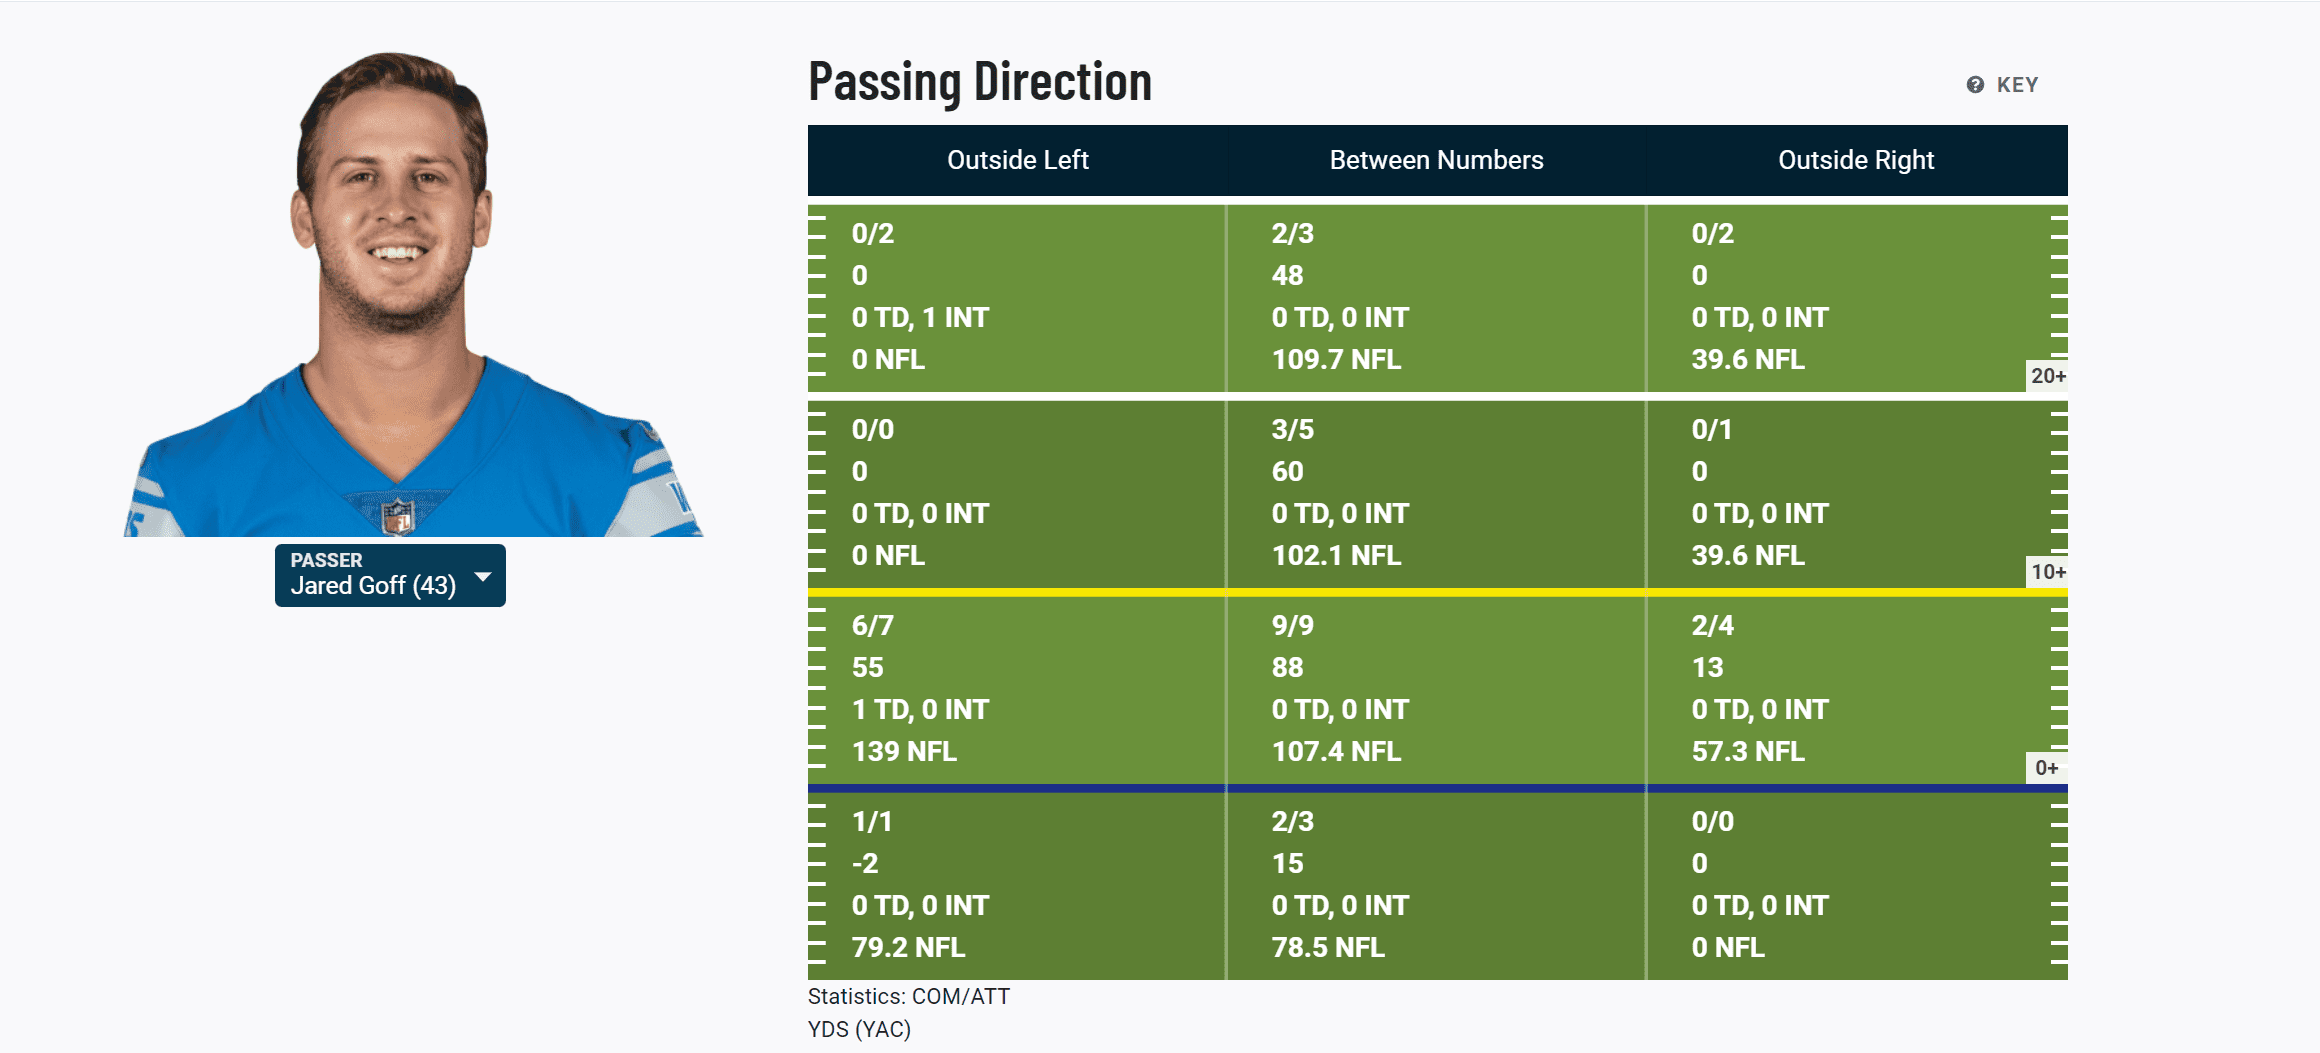 Jared Goff Passing Direction Breakdown from PFF.com